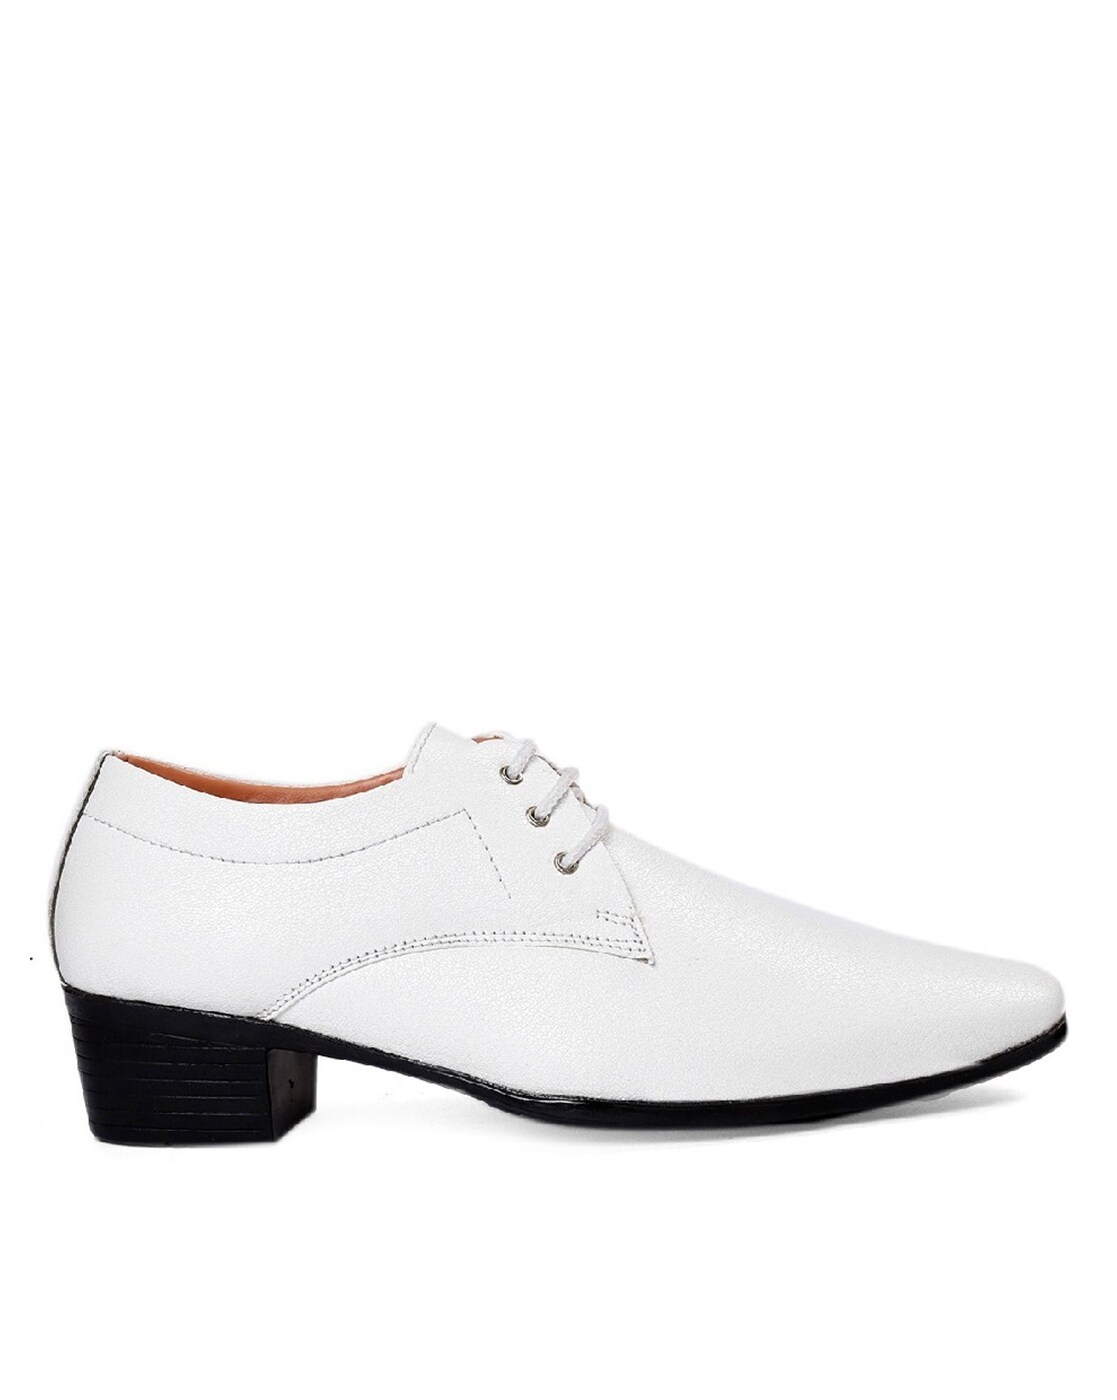 White Dress Pants with White Dress Shoes Outfits For Men (6 ideas &  outfits) | Lookastic